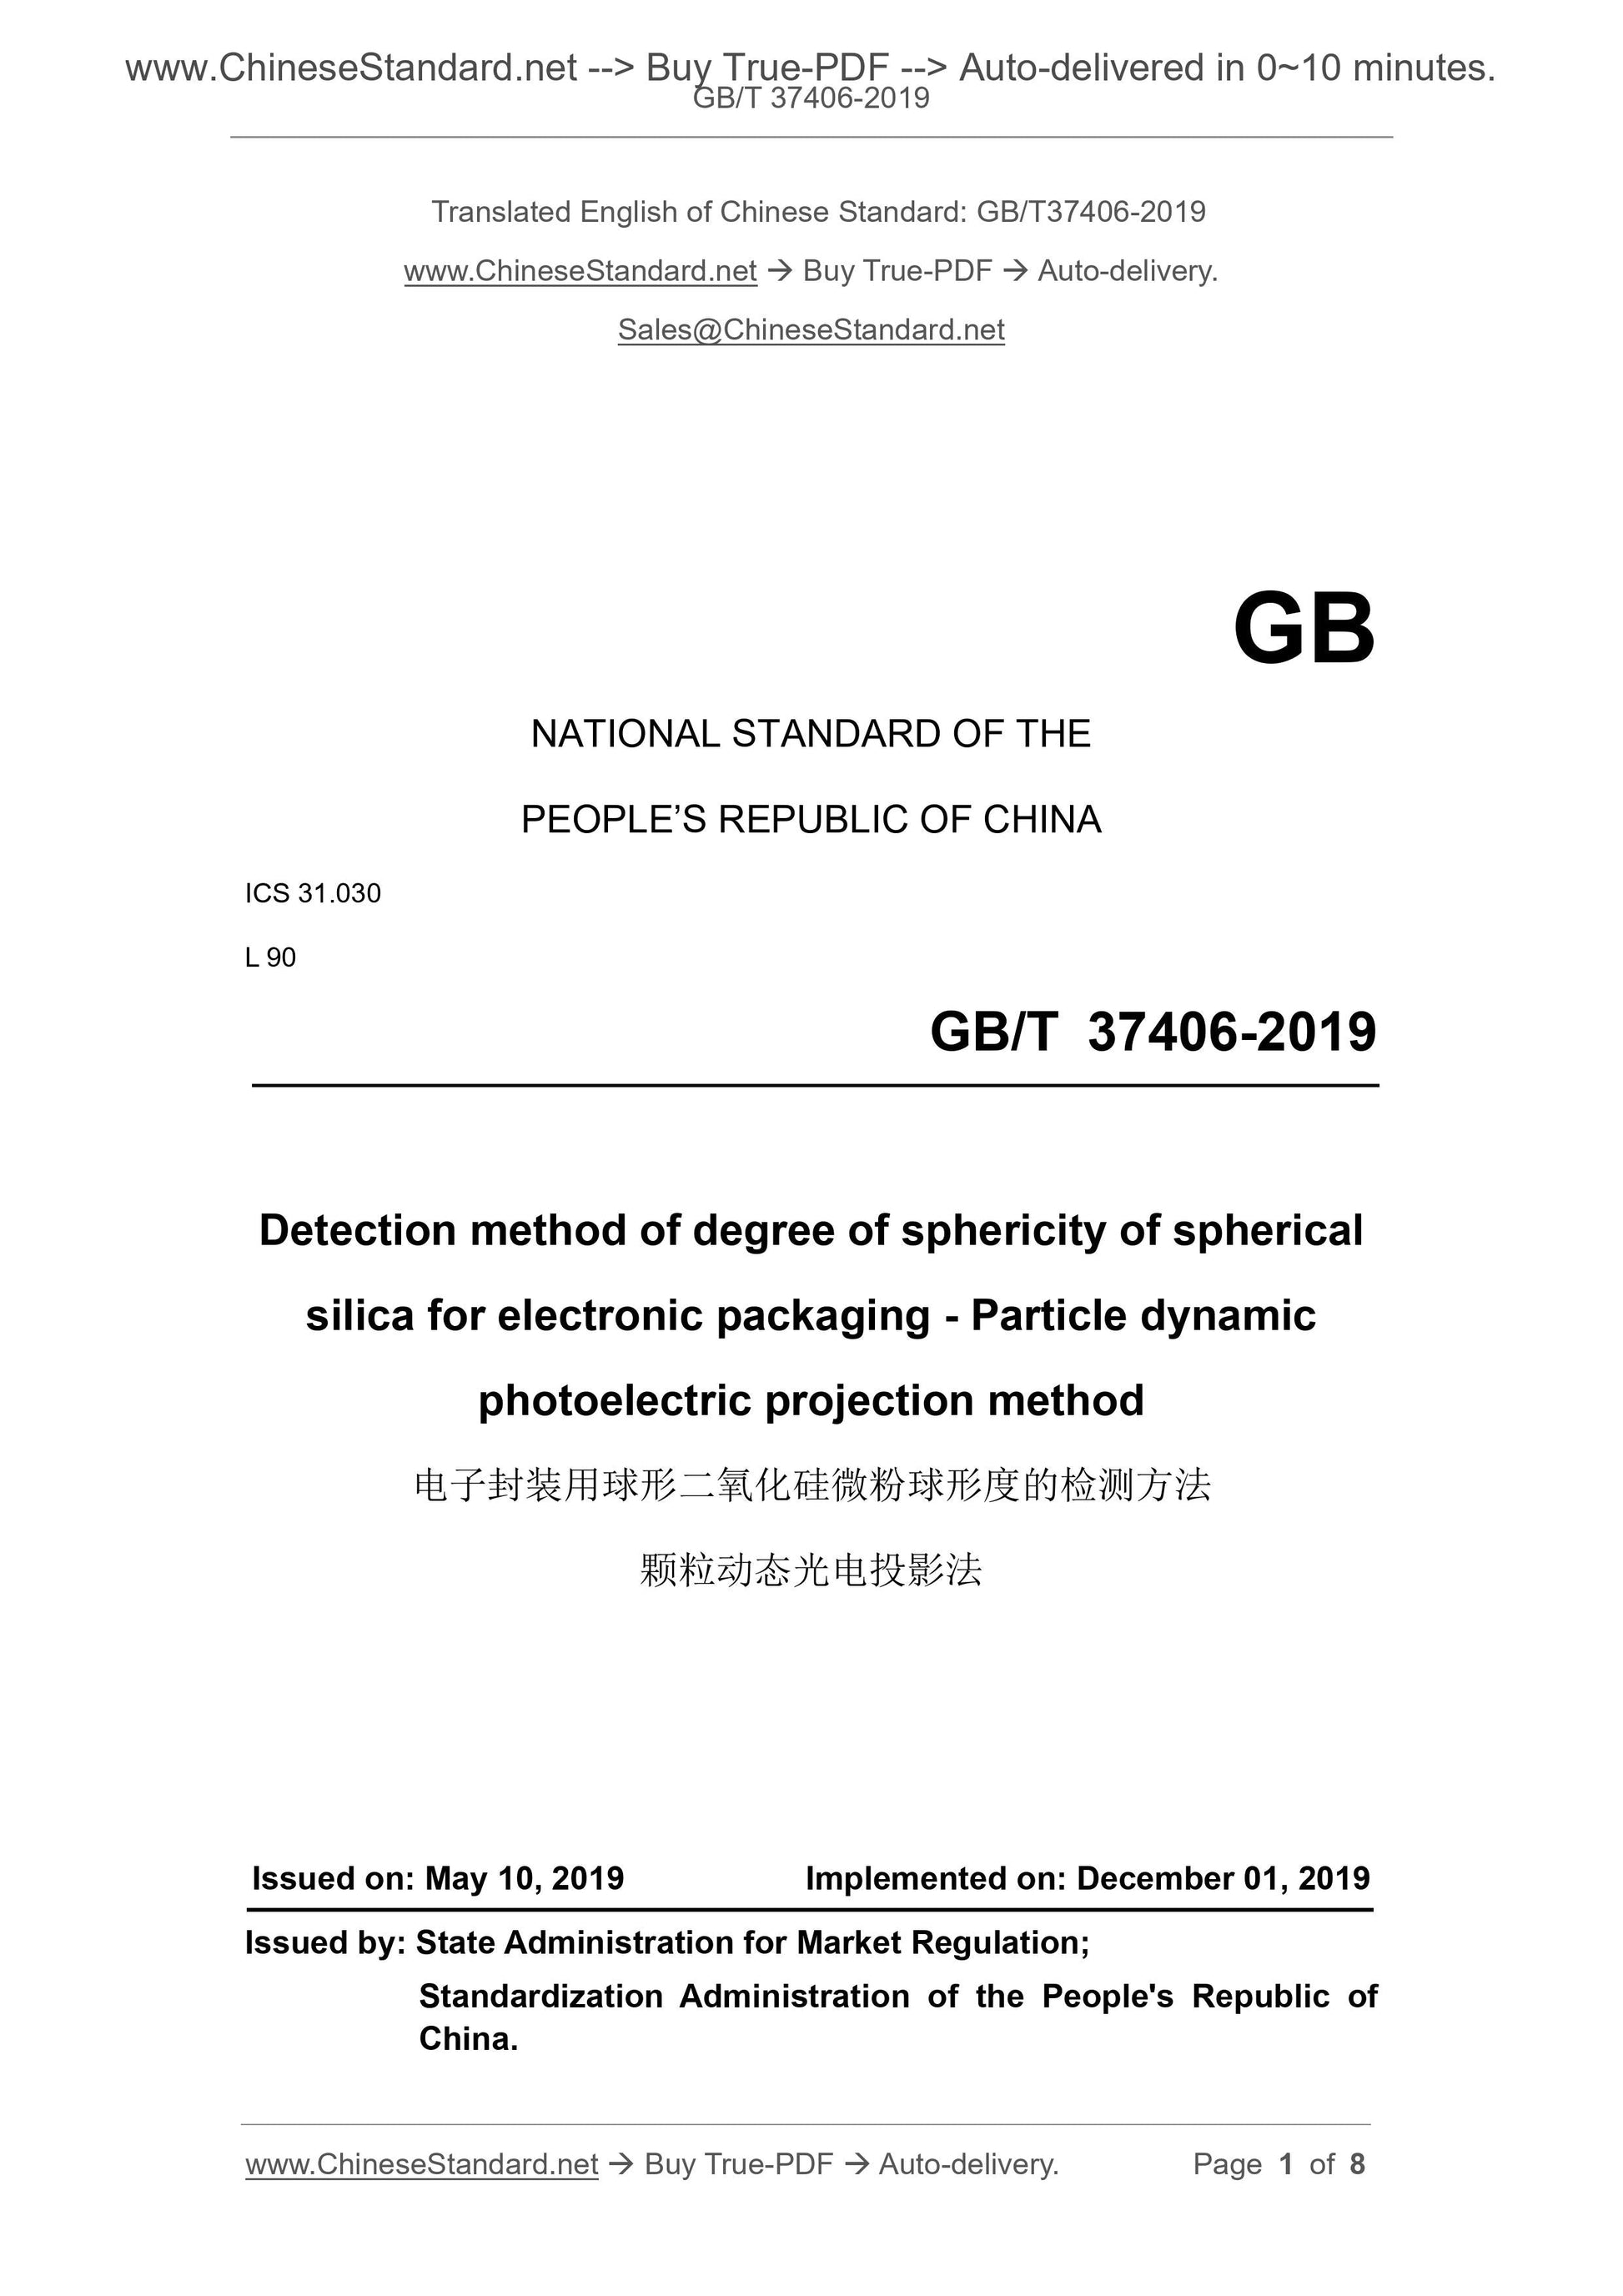 GB/T 37406-2019 Page 1